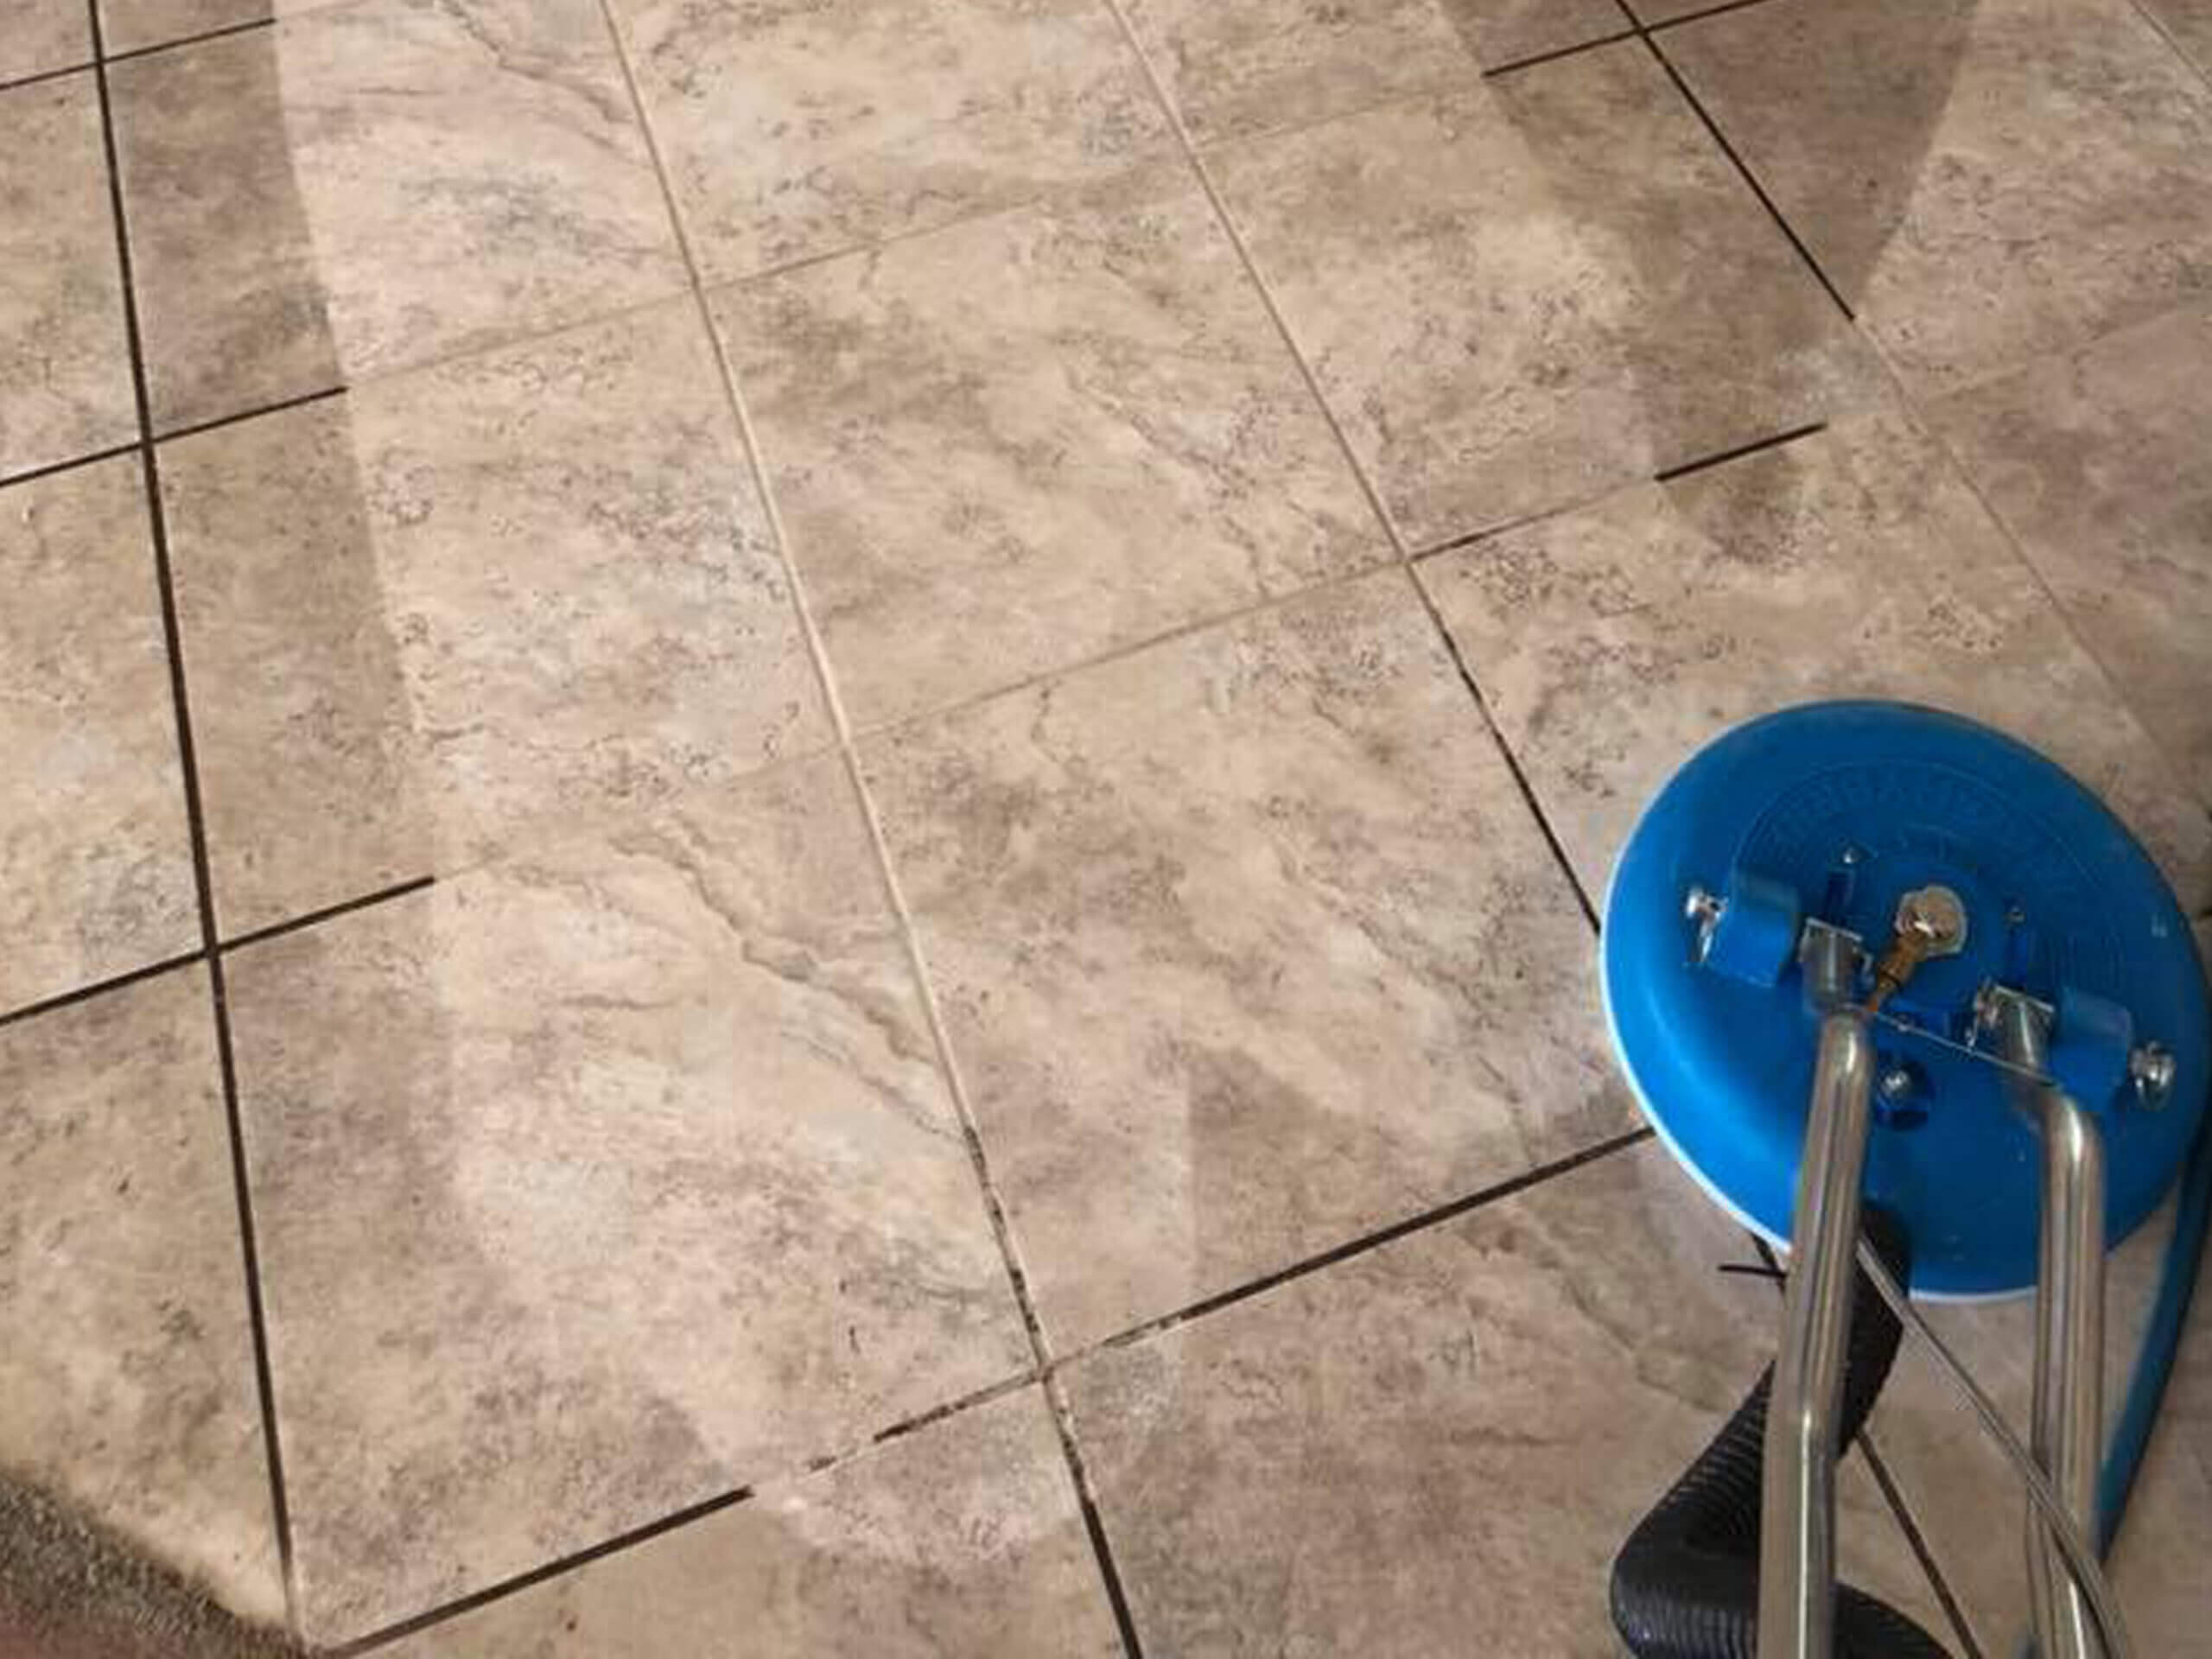 https://asapcarpetcleaning.net/wp-content/uploads/2020/12/Tile-And-Grout-Cleaning-7.jpg